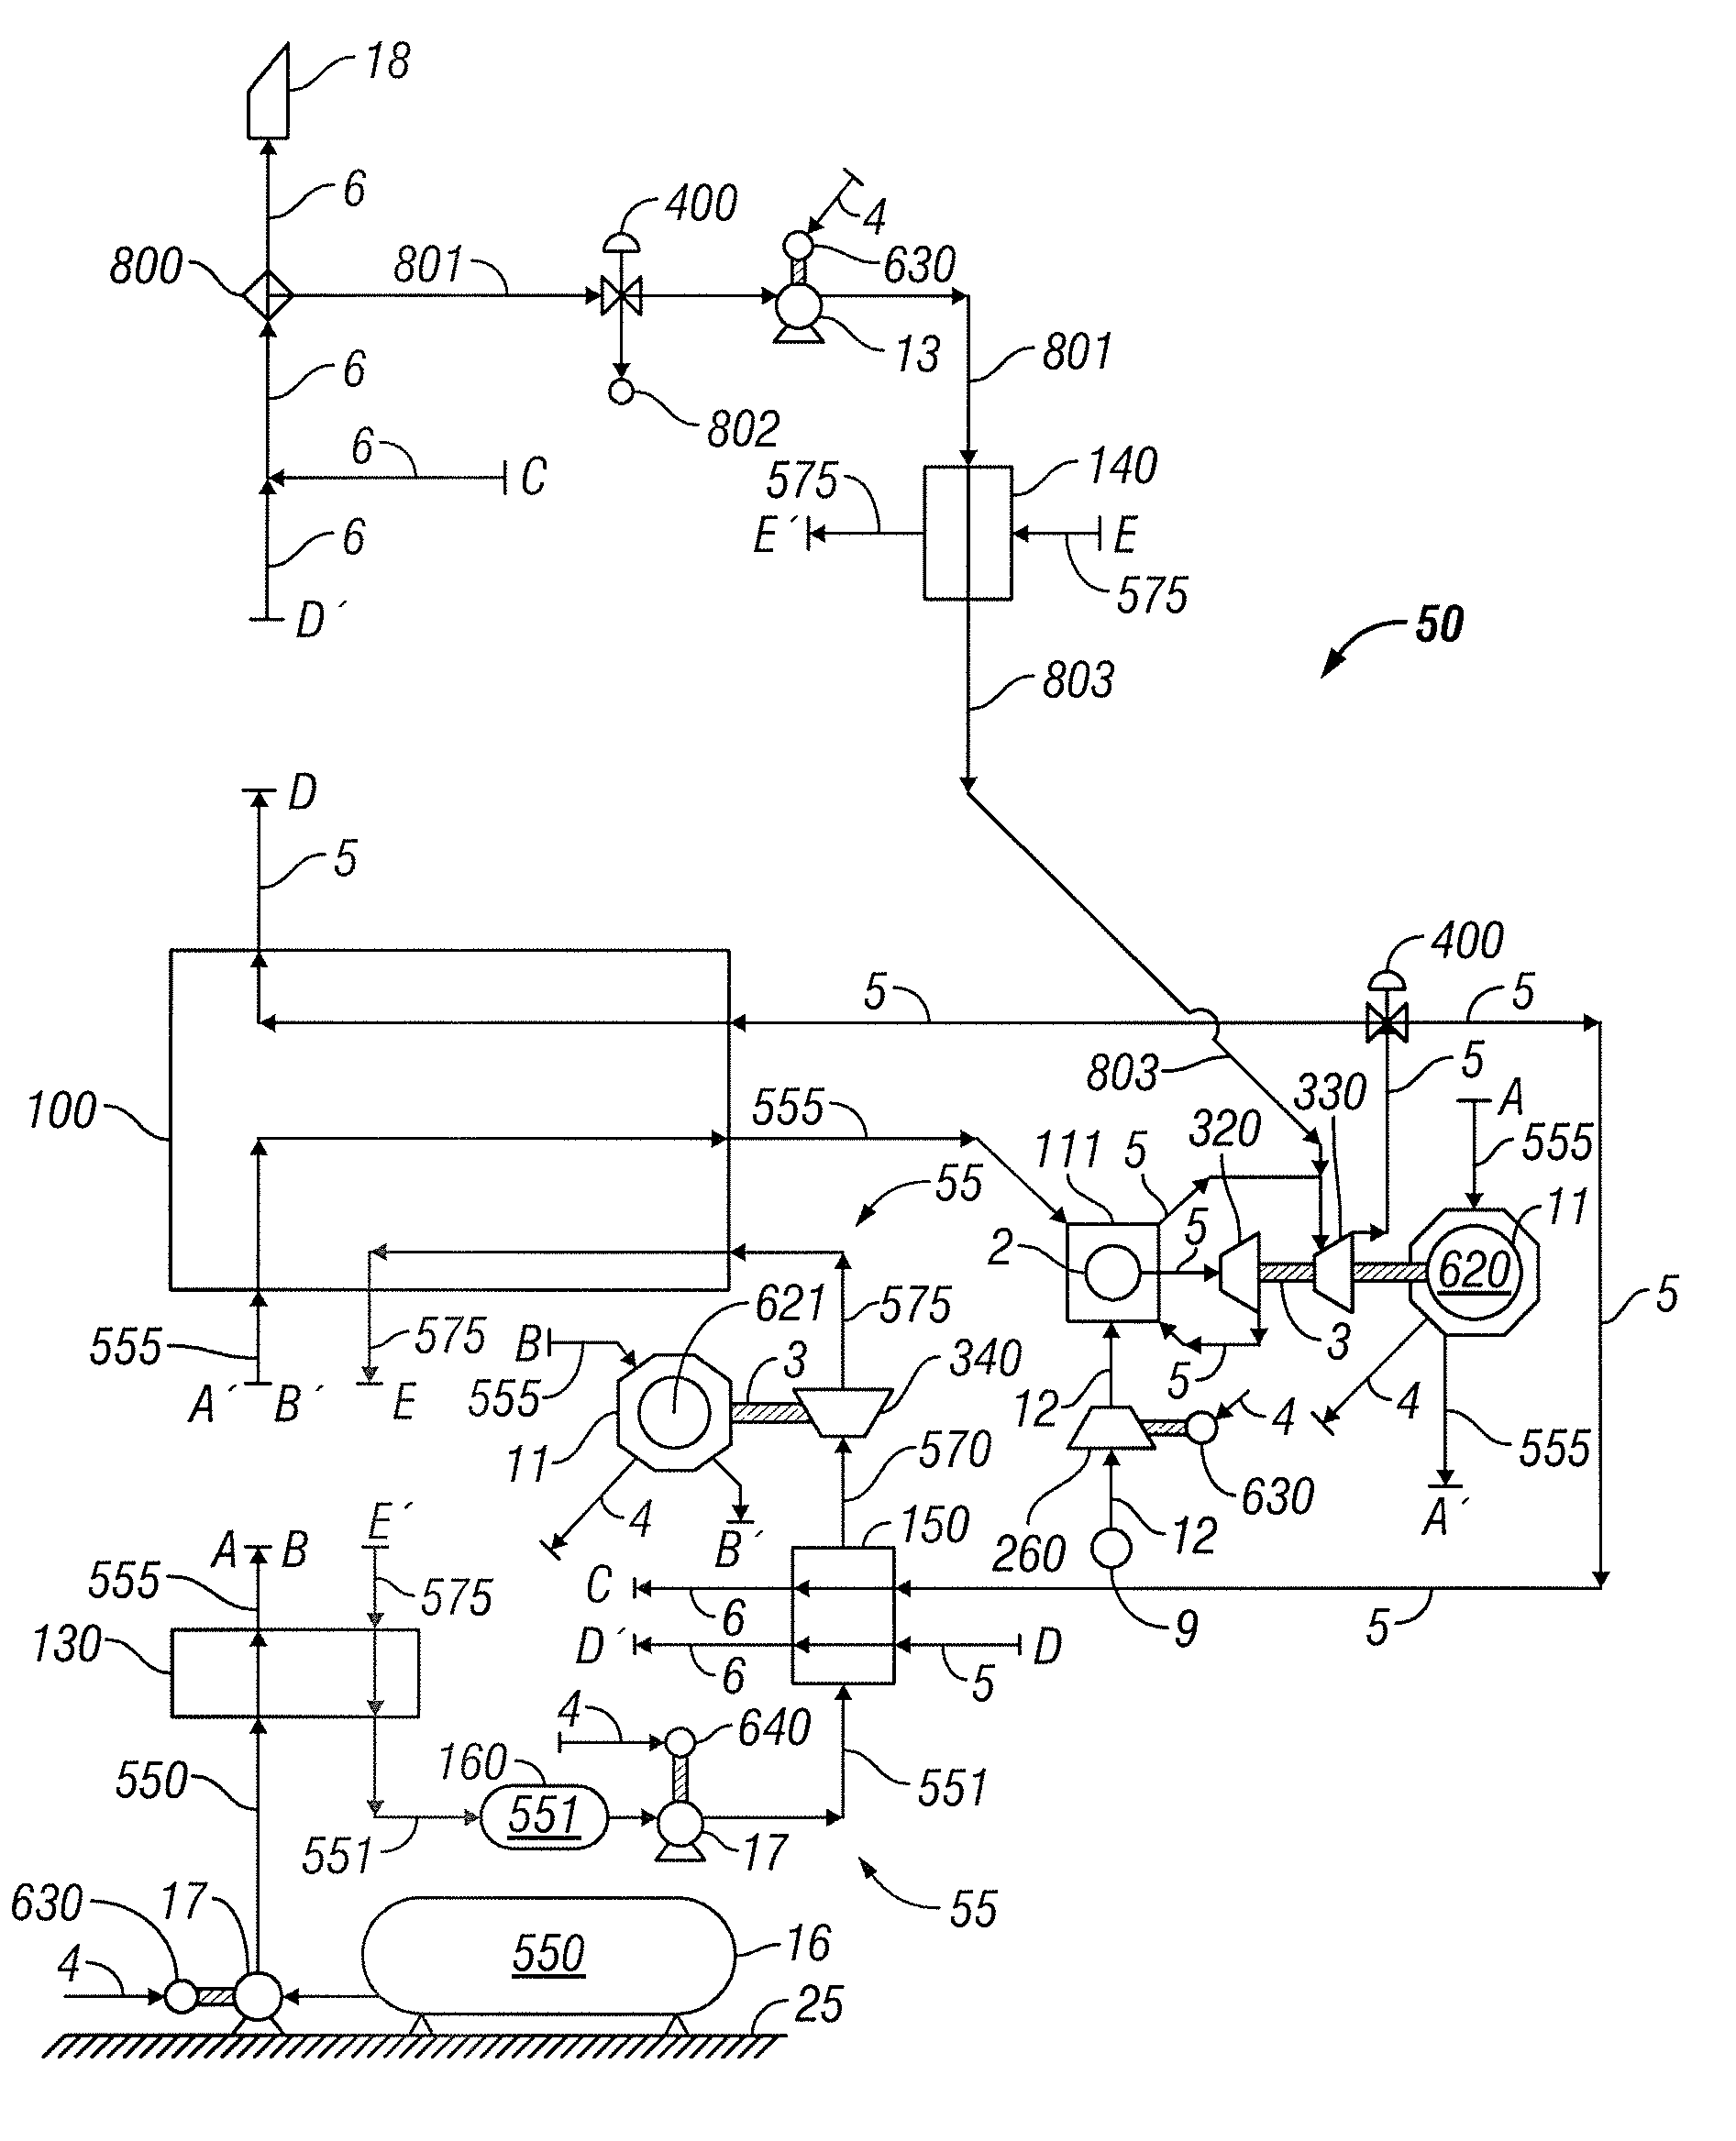 System and method for liquid air production, power storage and power release